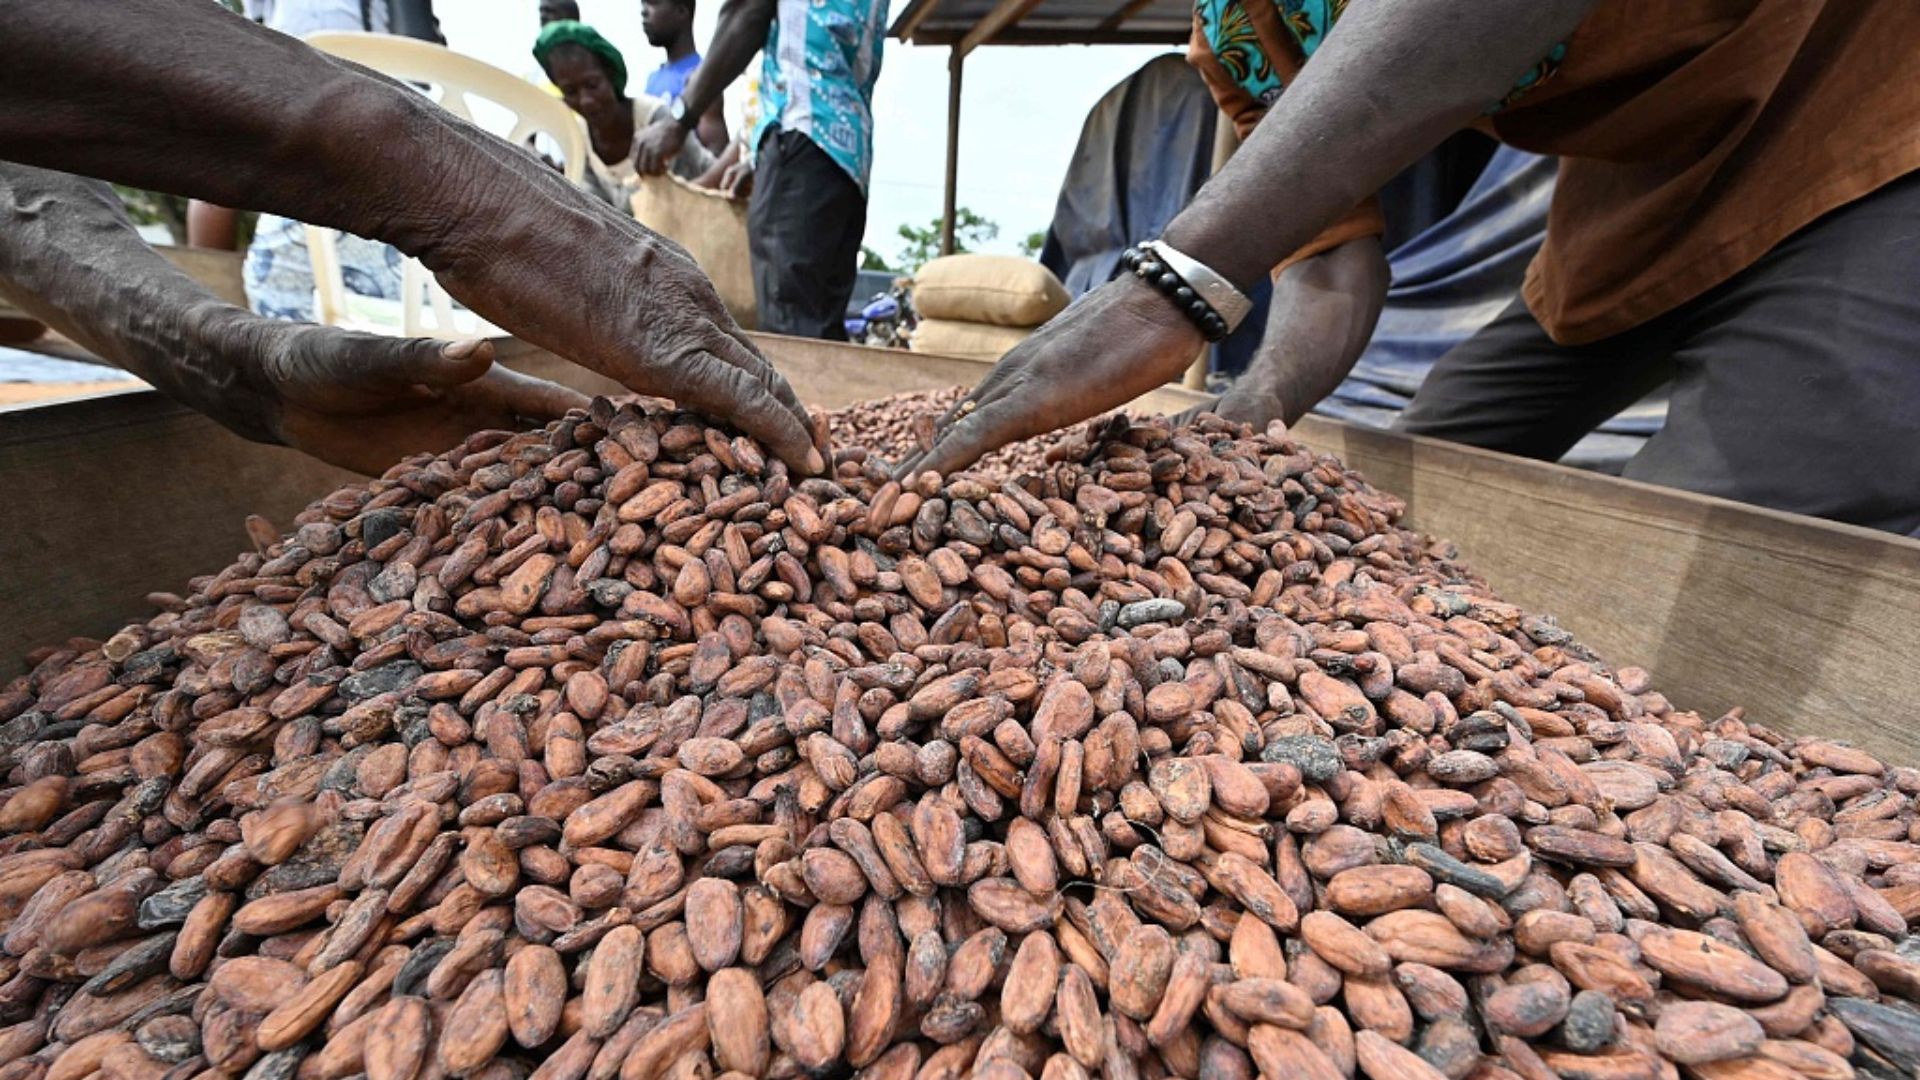 Farmers harvesting organic cocoa beans in central Côte d'Ivoire. /Issouf Sanogo/CFP